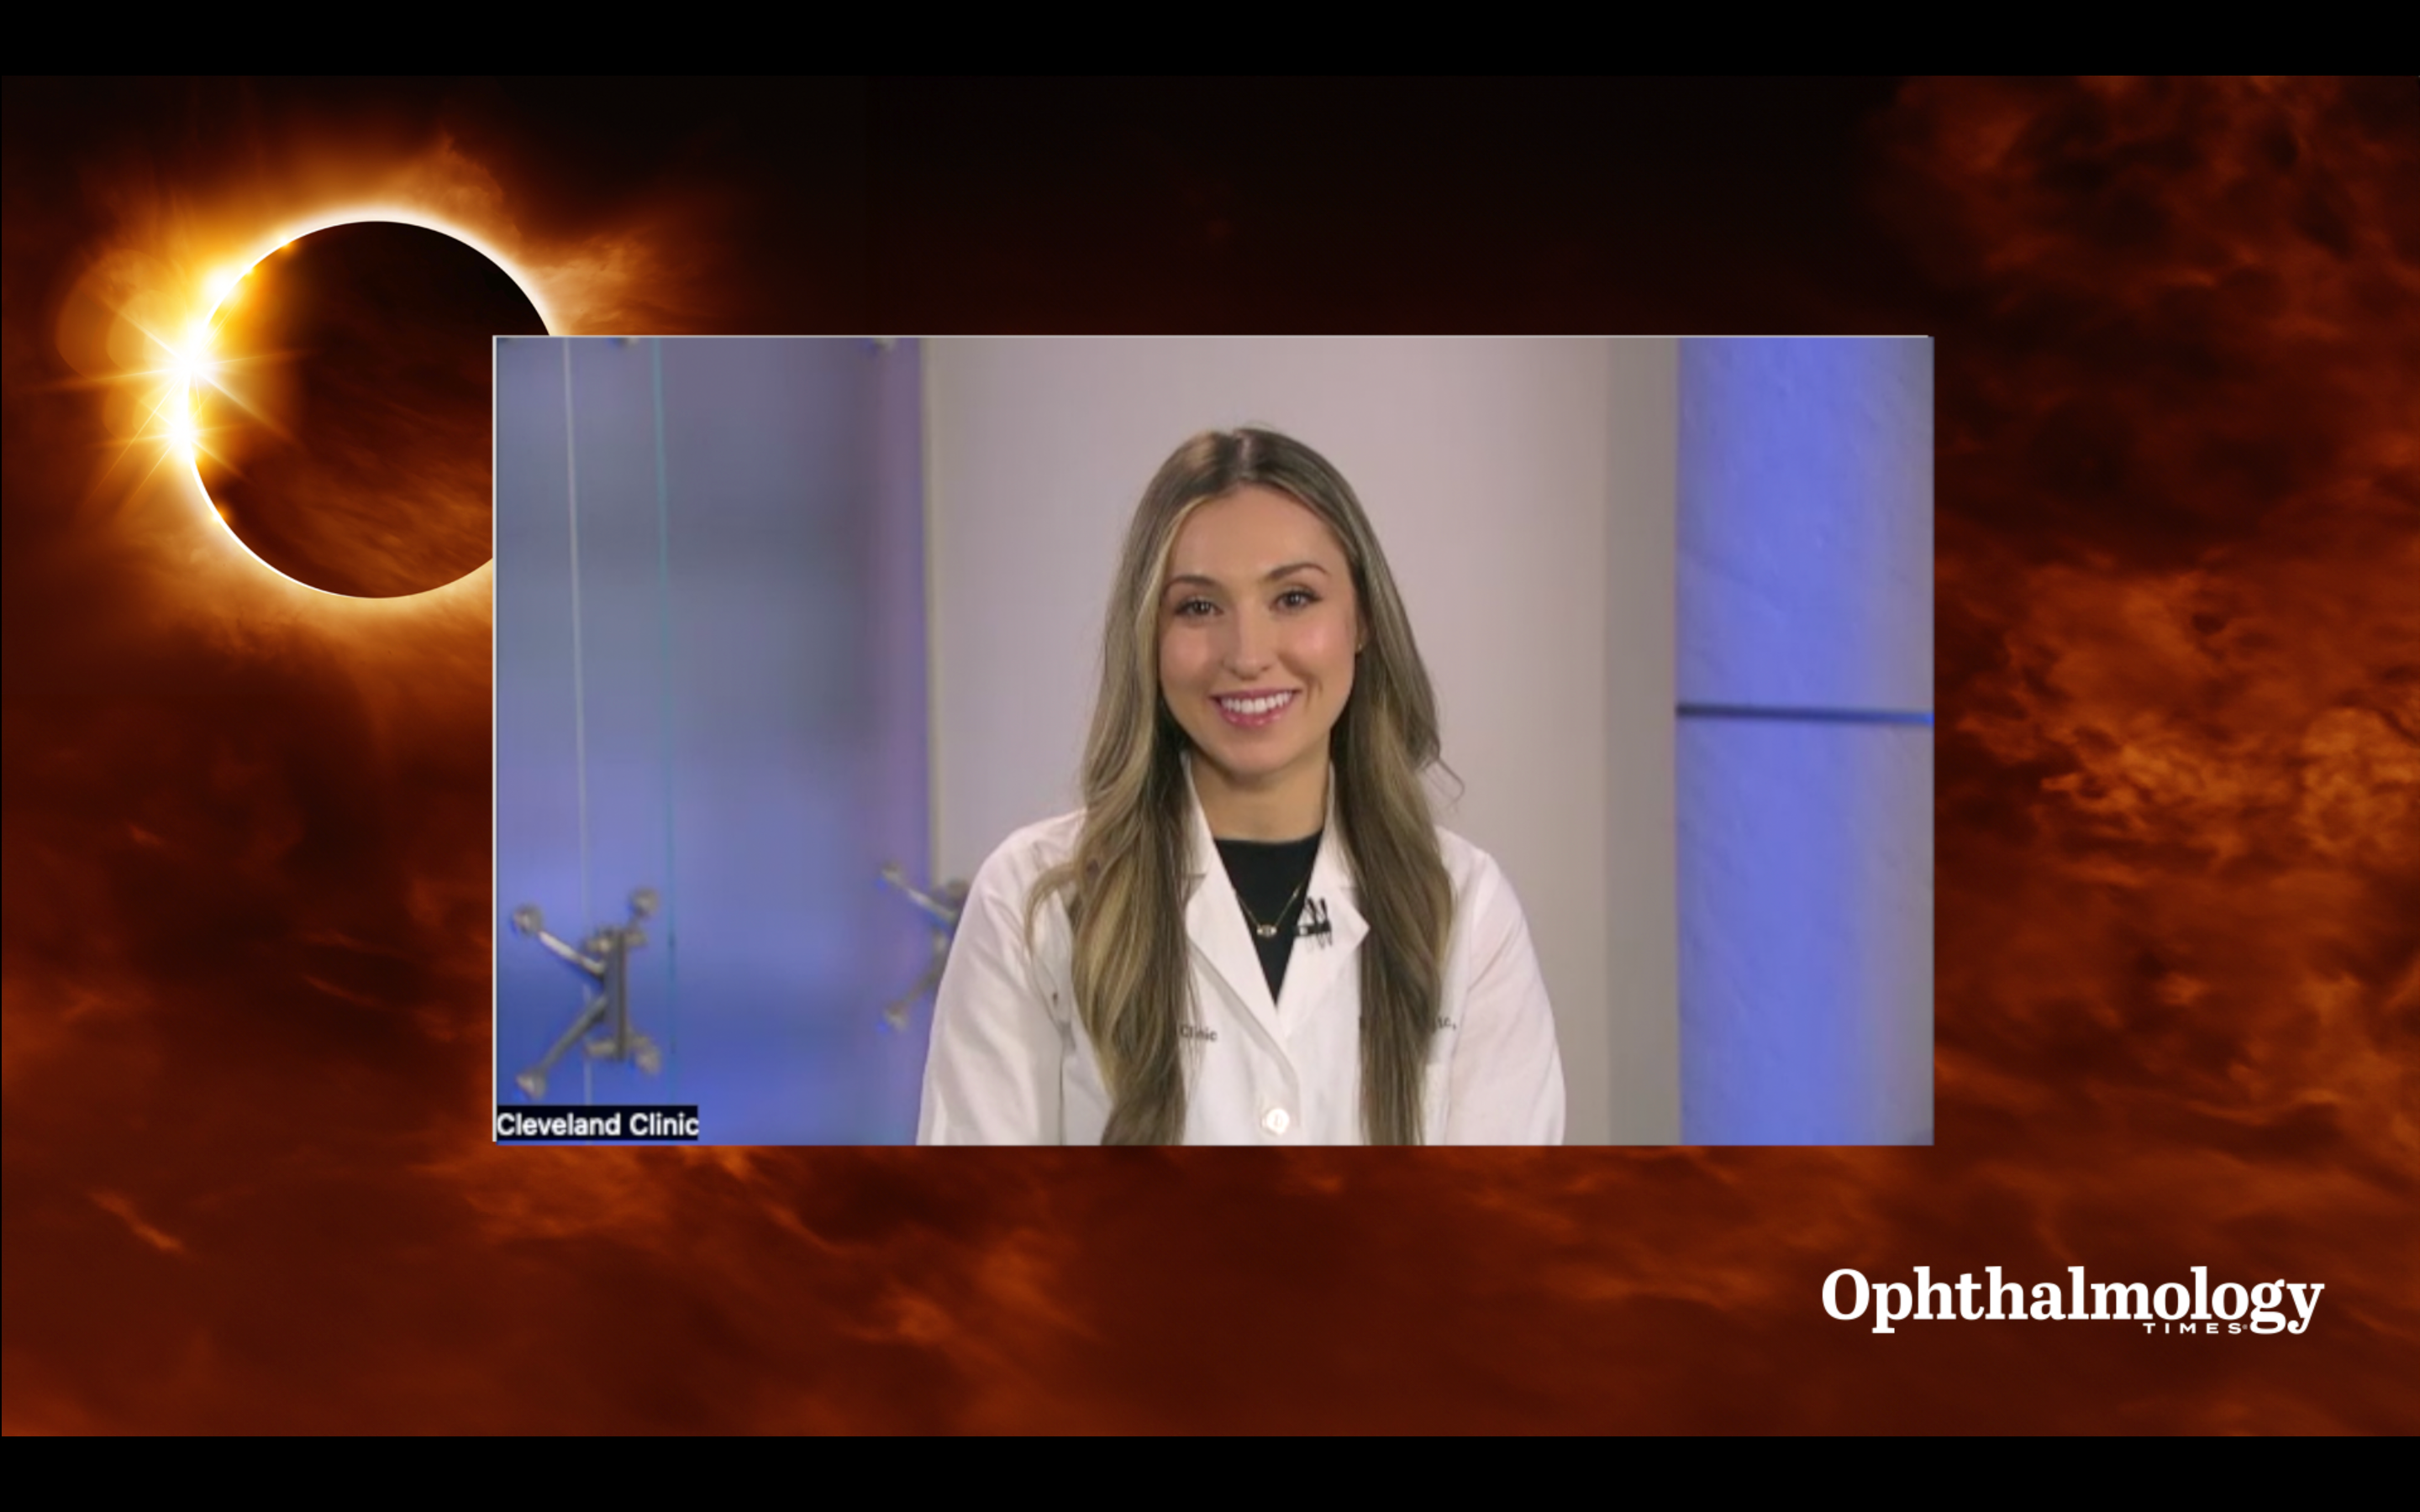 Cleveland Clinic ophthalmologist, Nicole Bajic, MD, shares insights from the path of totality